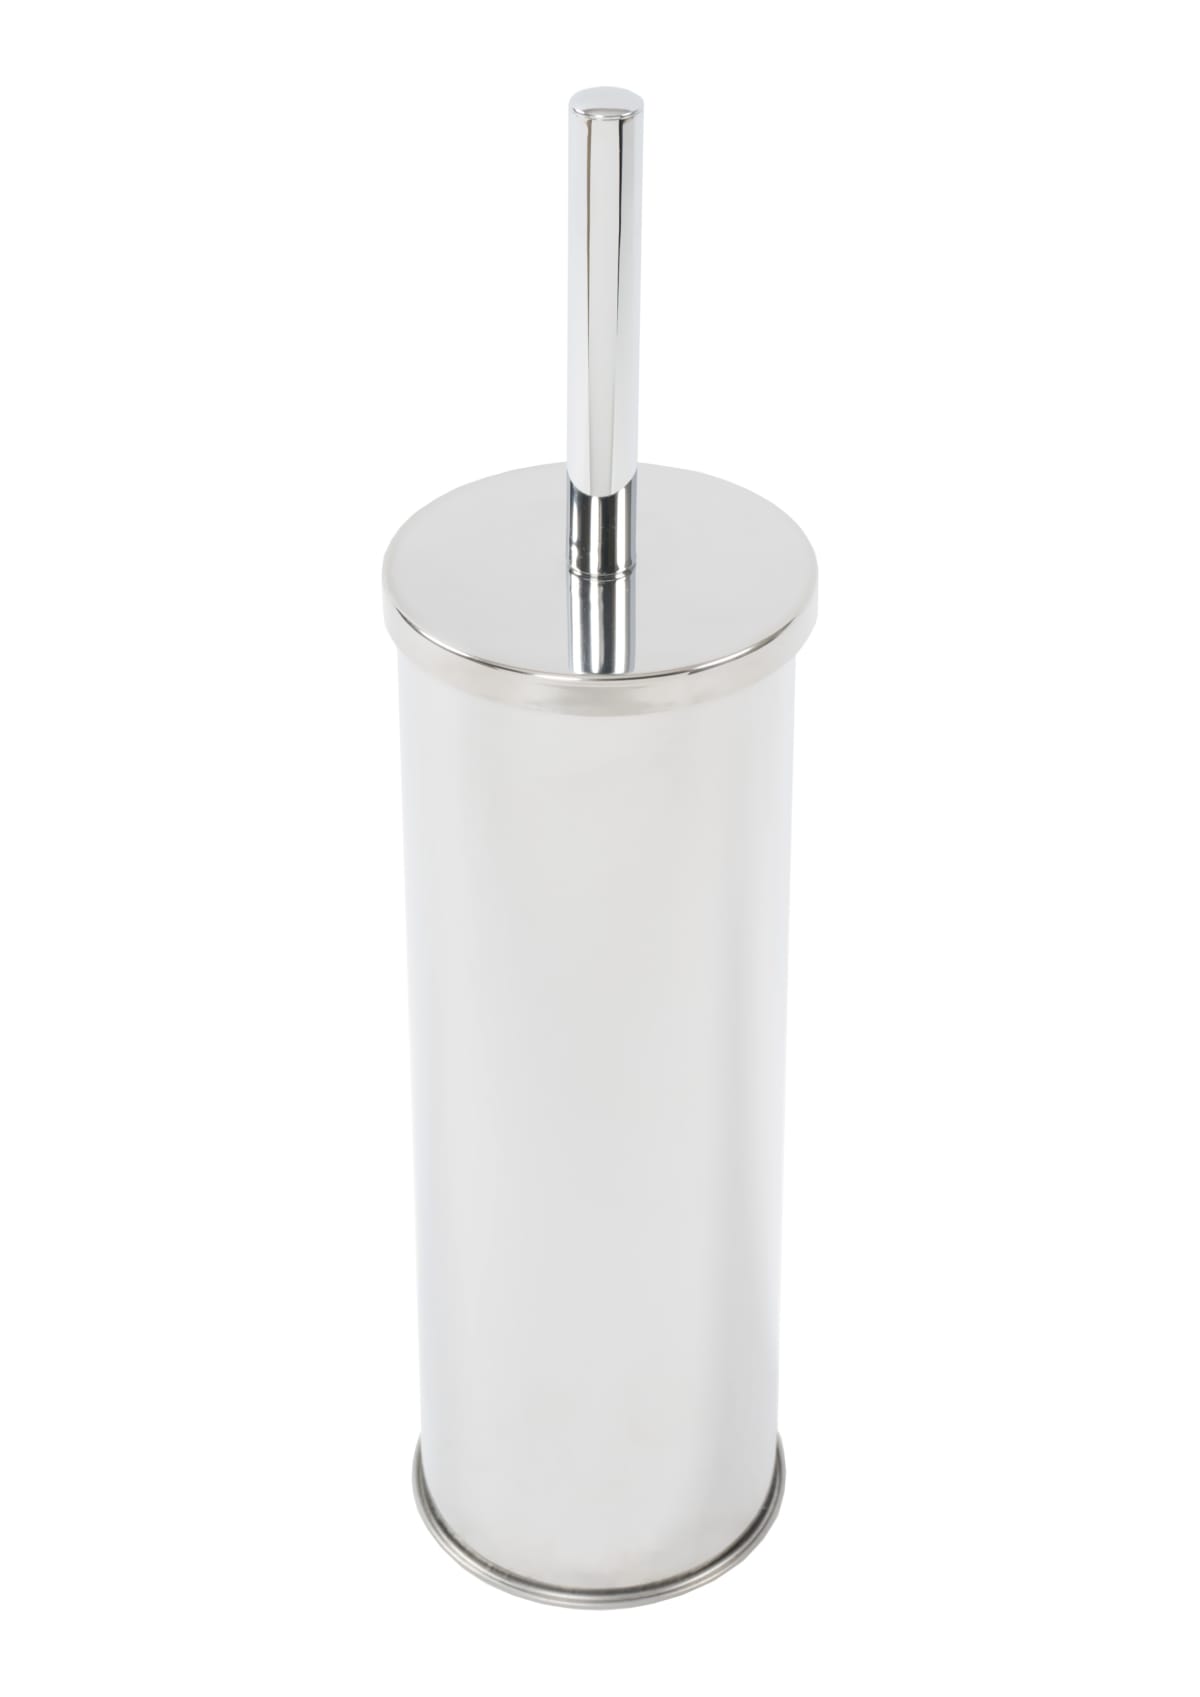 CHROME-PLATED WALL TOILET BRUSH HOLDER COLD WIND